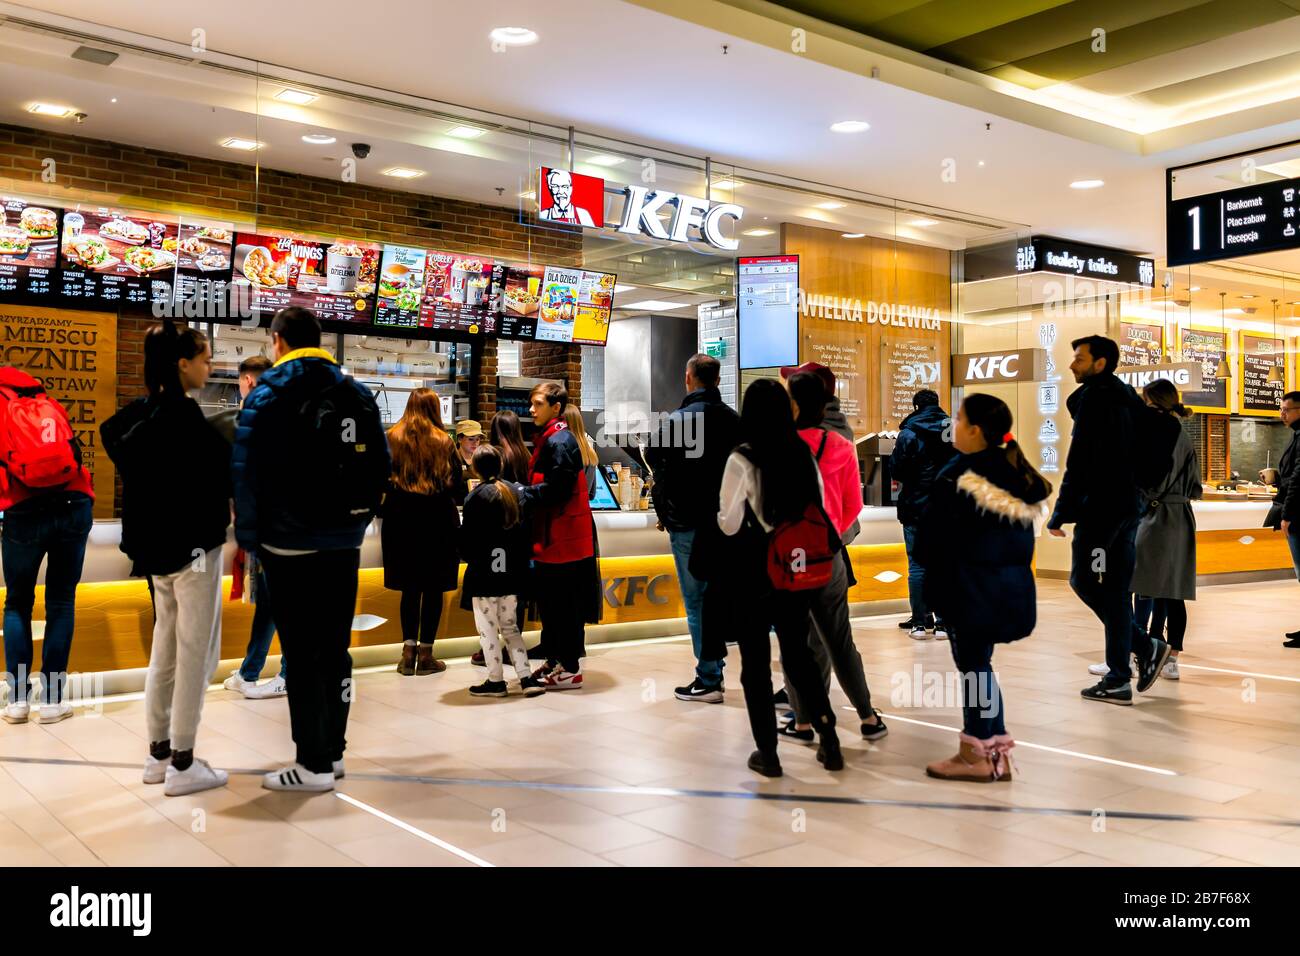 Warsaw, Poland - December 23, 2019: Food court with people standing waiting  in line for KFC Kentucky Fried Chicken fast food chain restaurant inside o  Stock Photo - Alamy